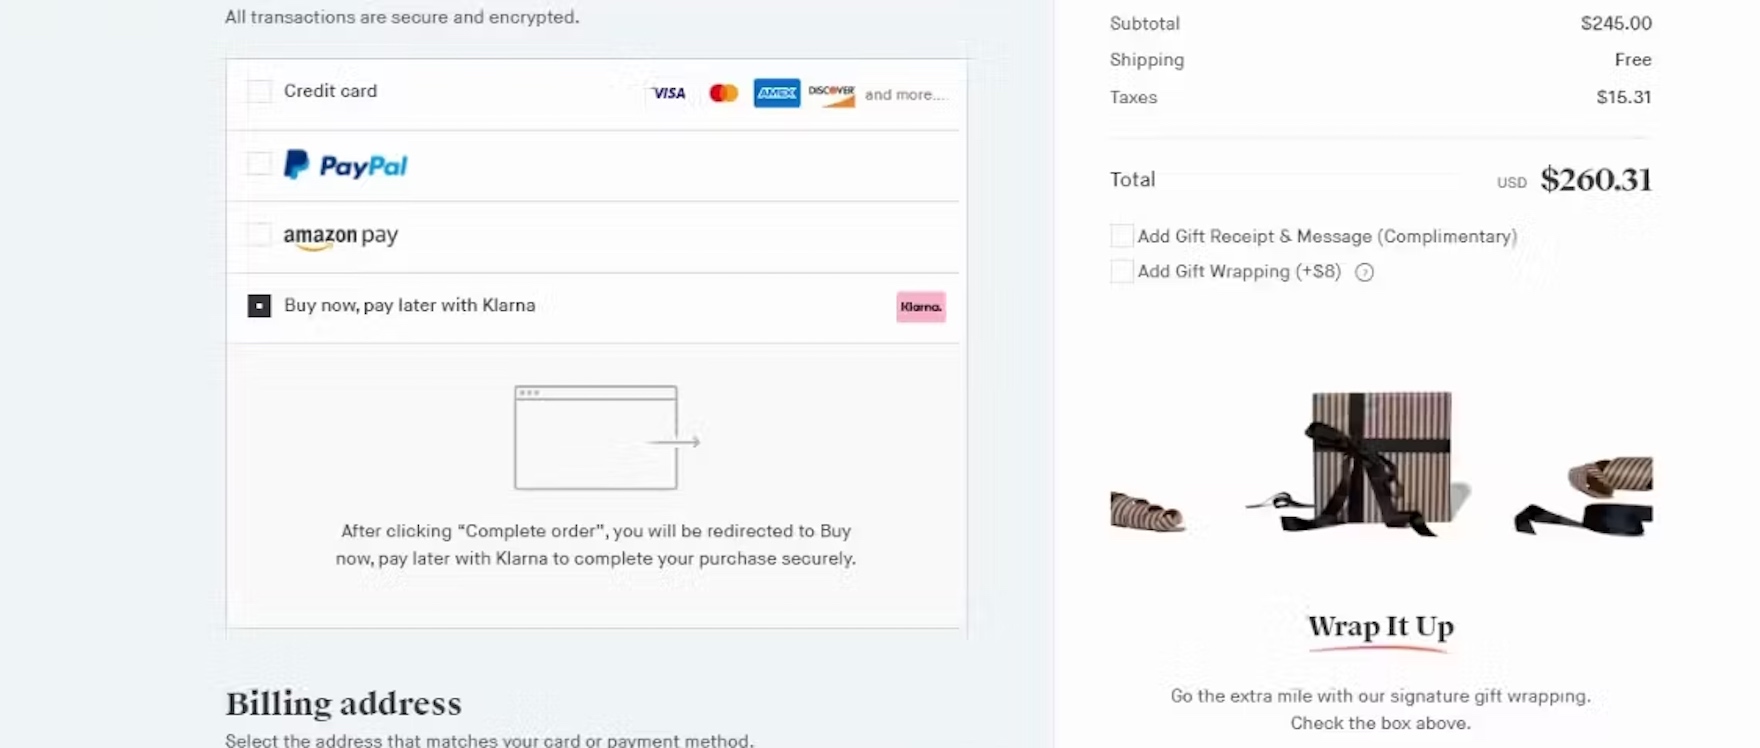 How to improve an E-Commerce Checkout Experience: UI/UX Case study